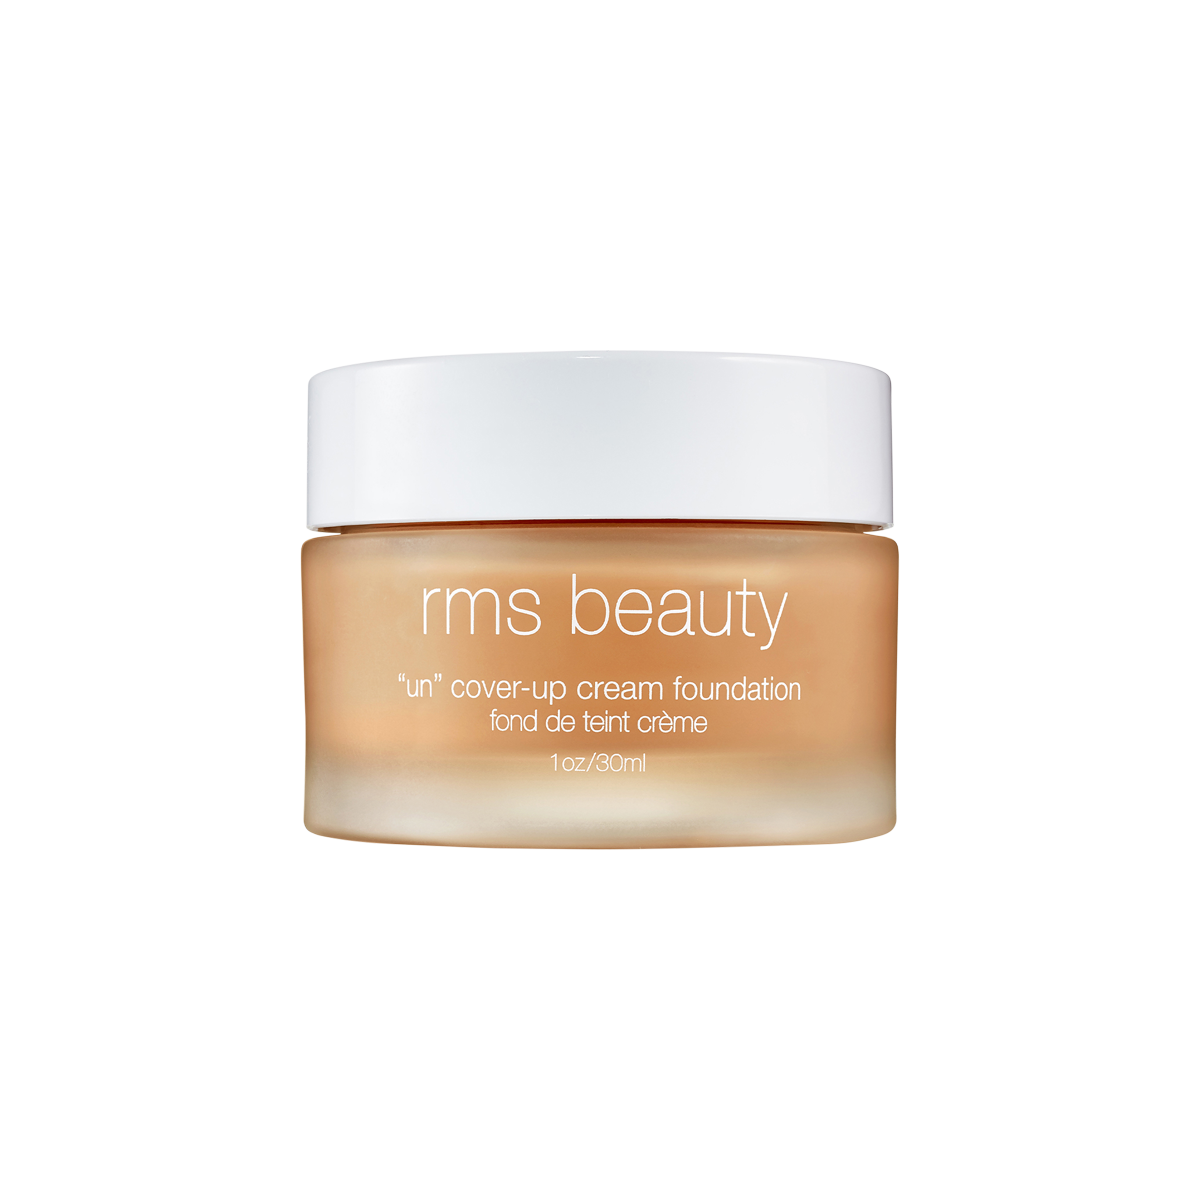 RMS Beauty - UnCoverup Cream Foundation